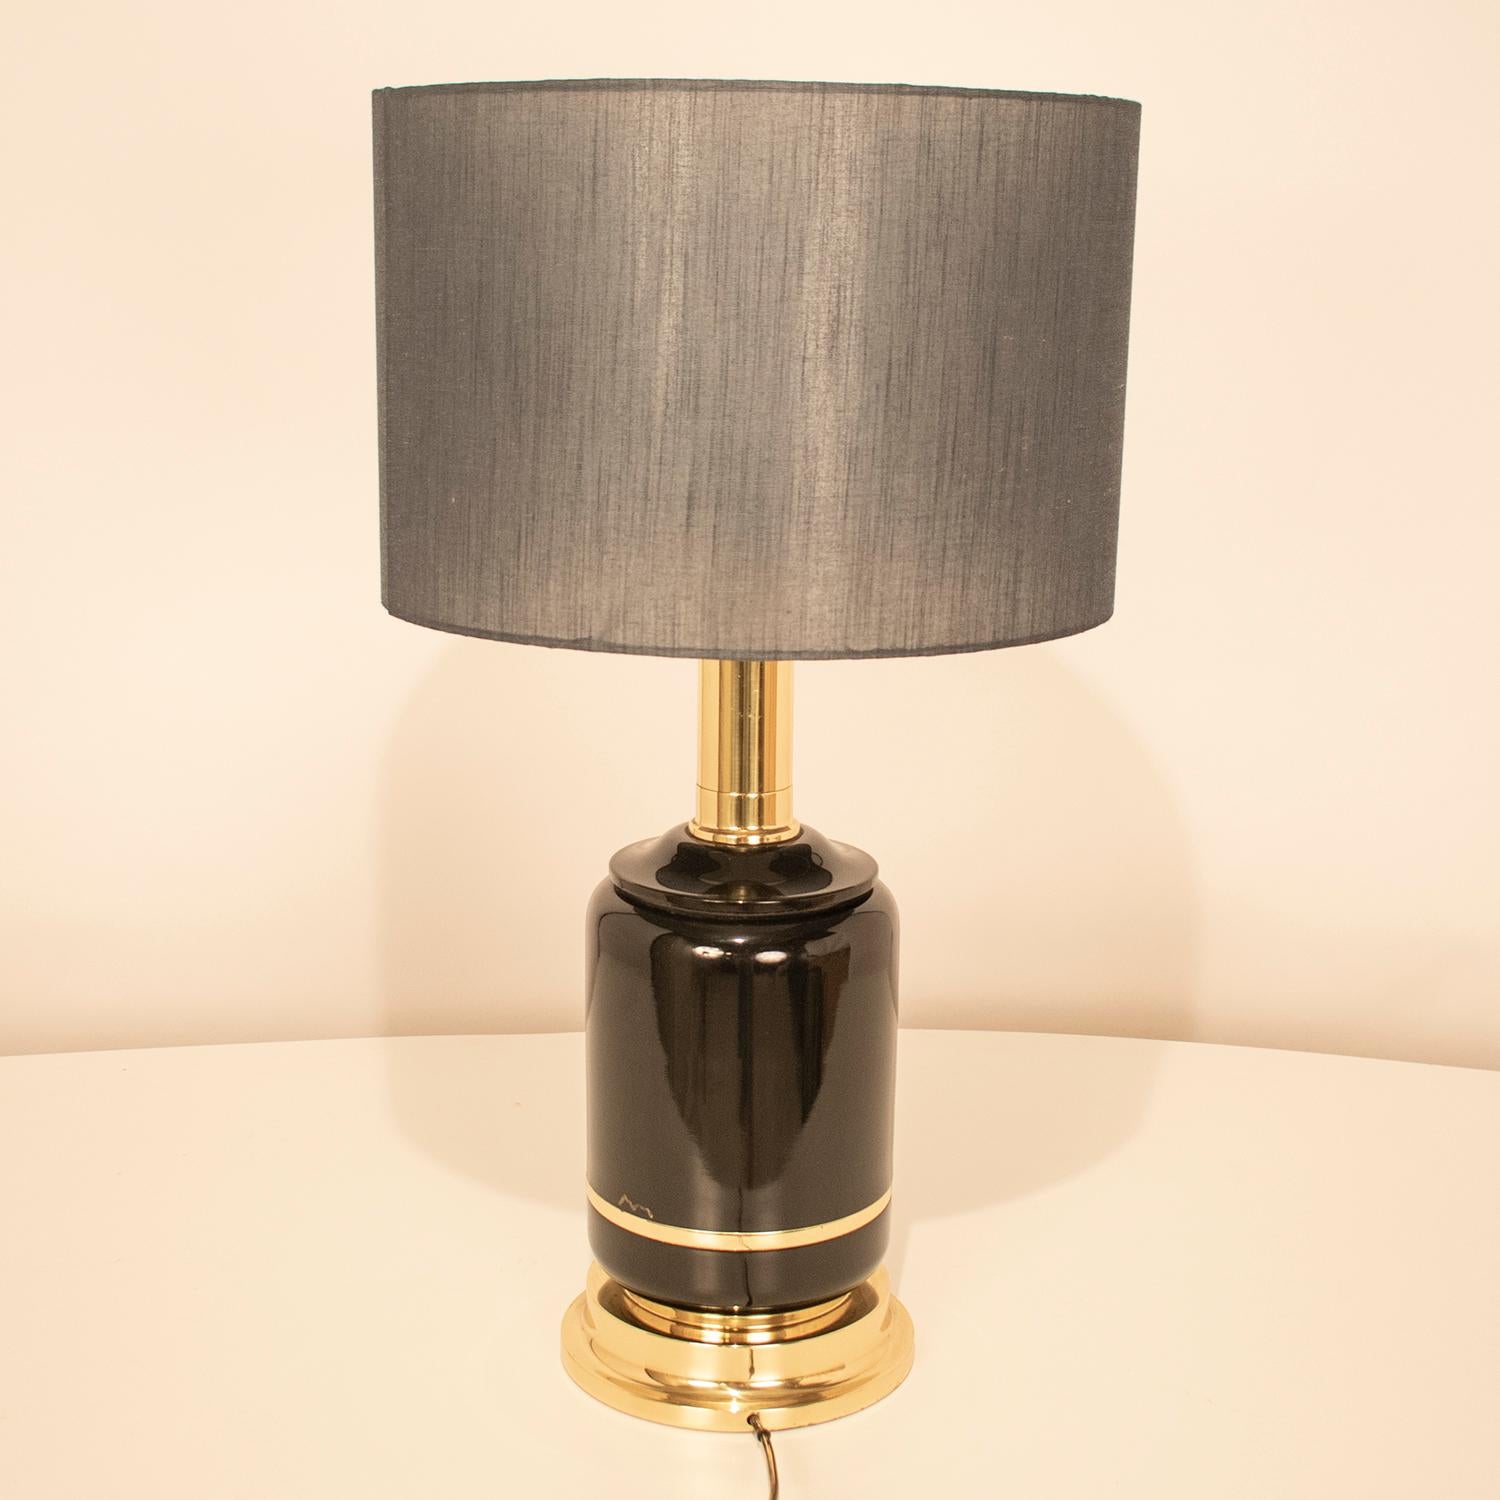 European Great Lamp, Brass and Lacquered by Clar, Spain, 1970s, Midcentury, Black For Sale